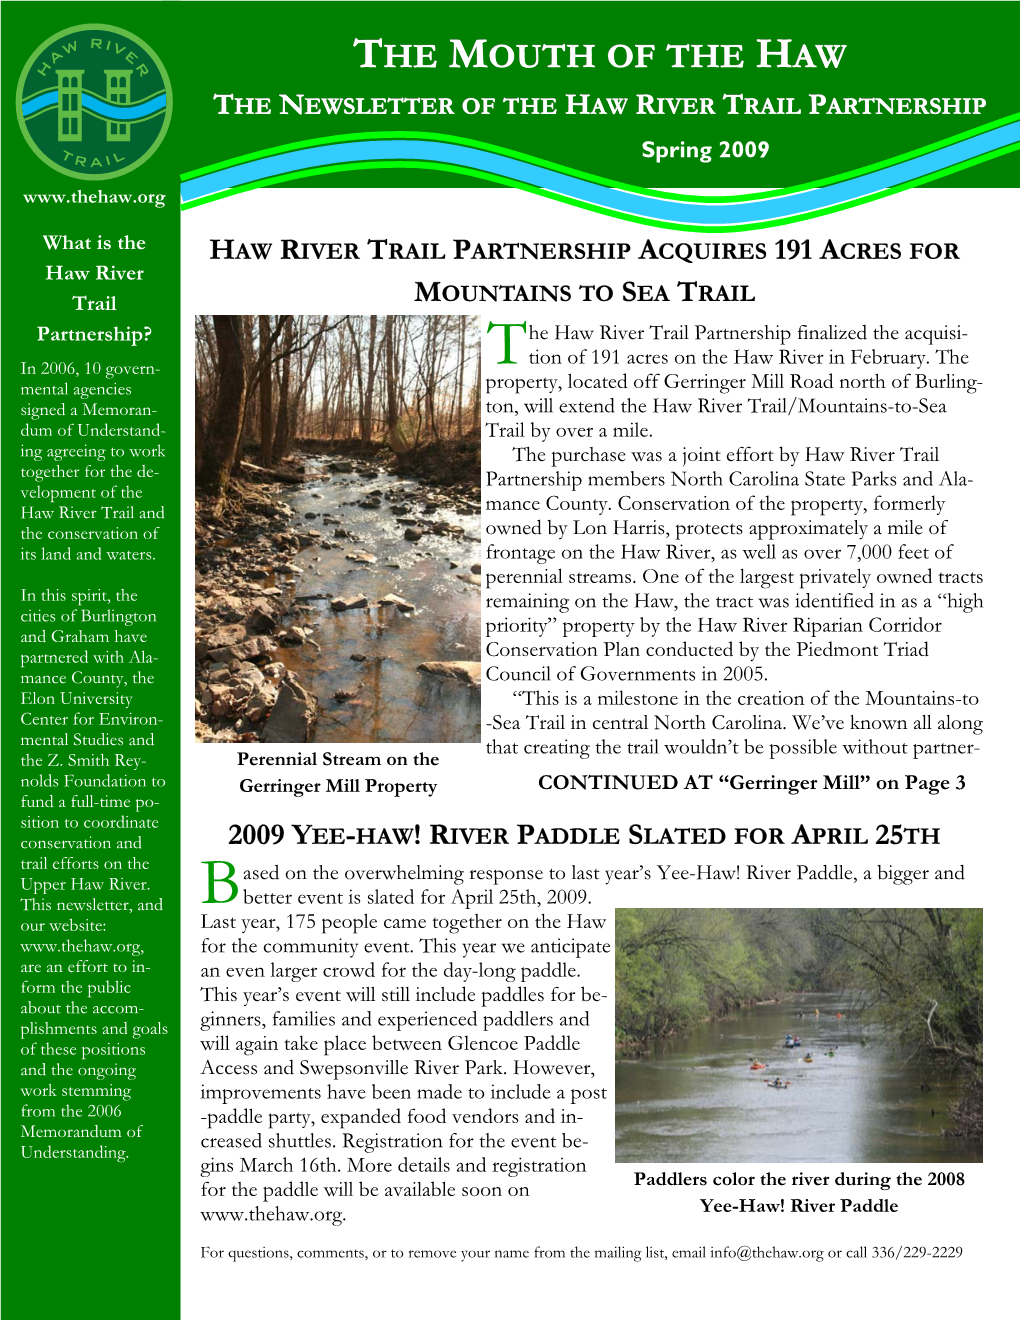 THE NEWSLETTER of the HAW RIVER TRAIL PARTNERSHIP Spring 2009